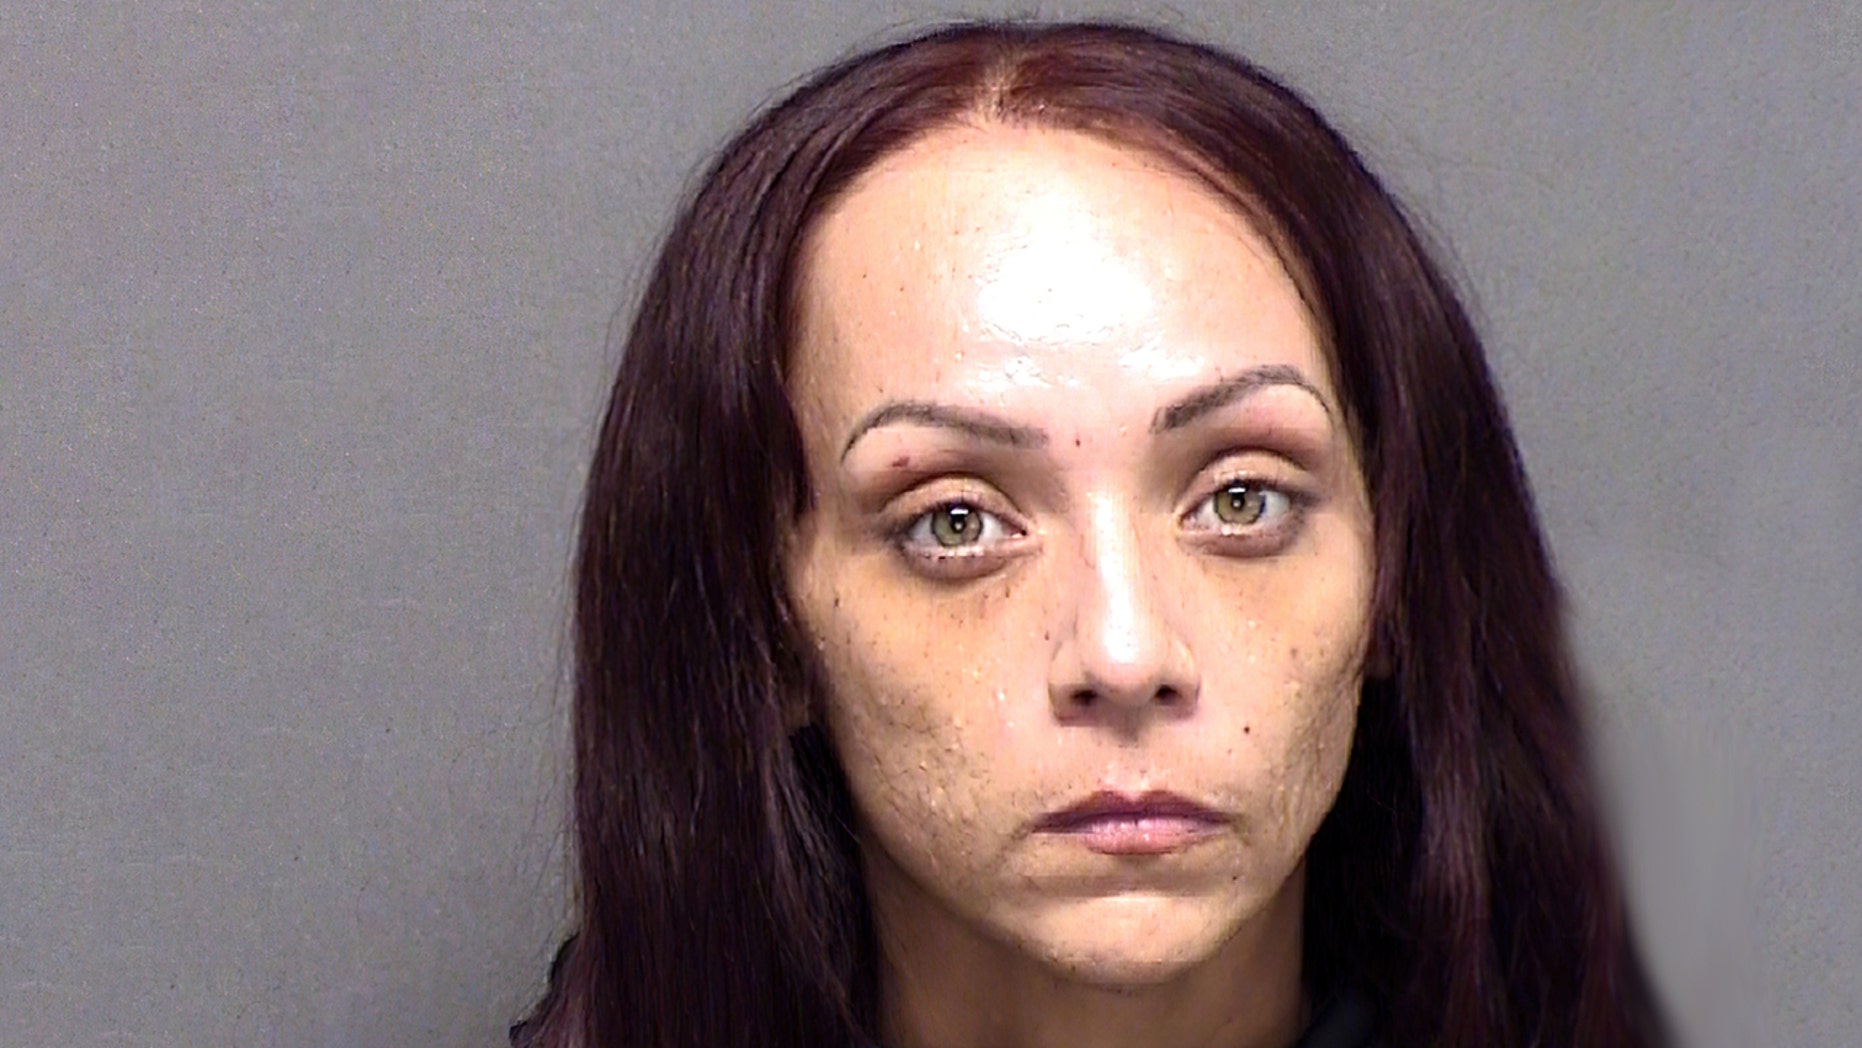 Texas woman arrested after toddlers found ‘hogtied,’ caged and ‘heavily soiled’